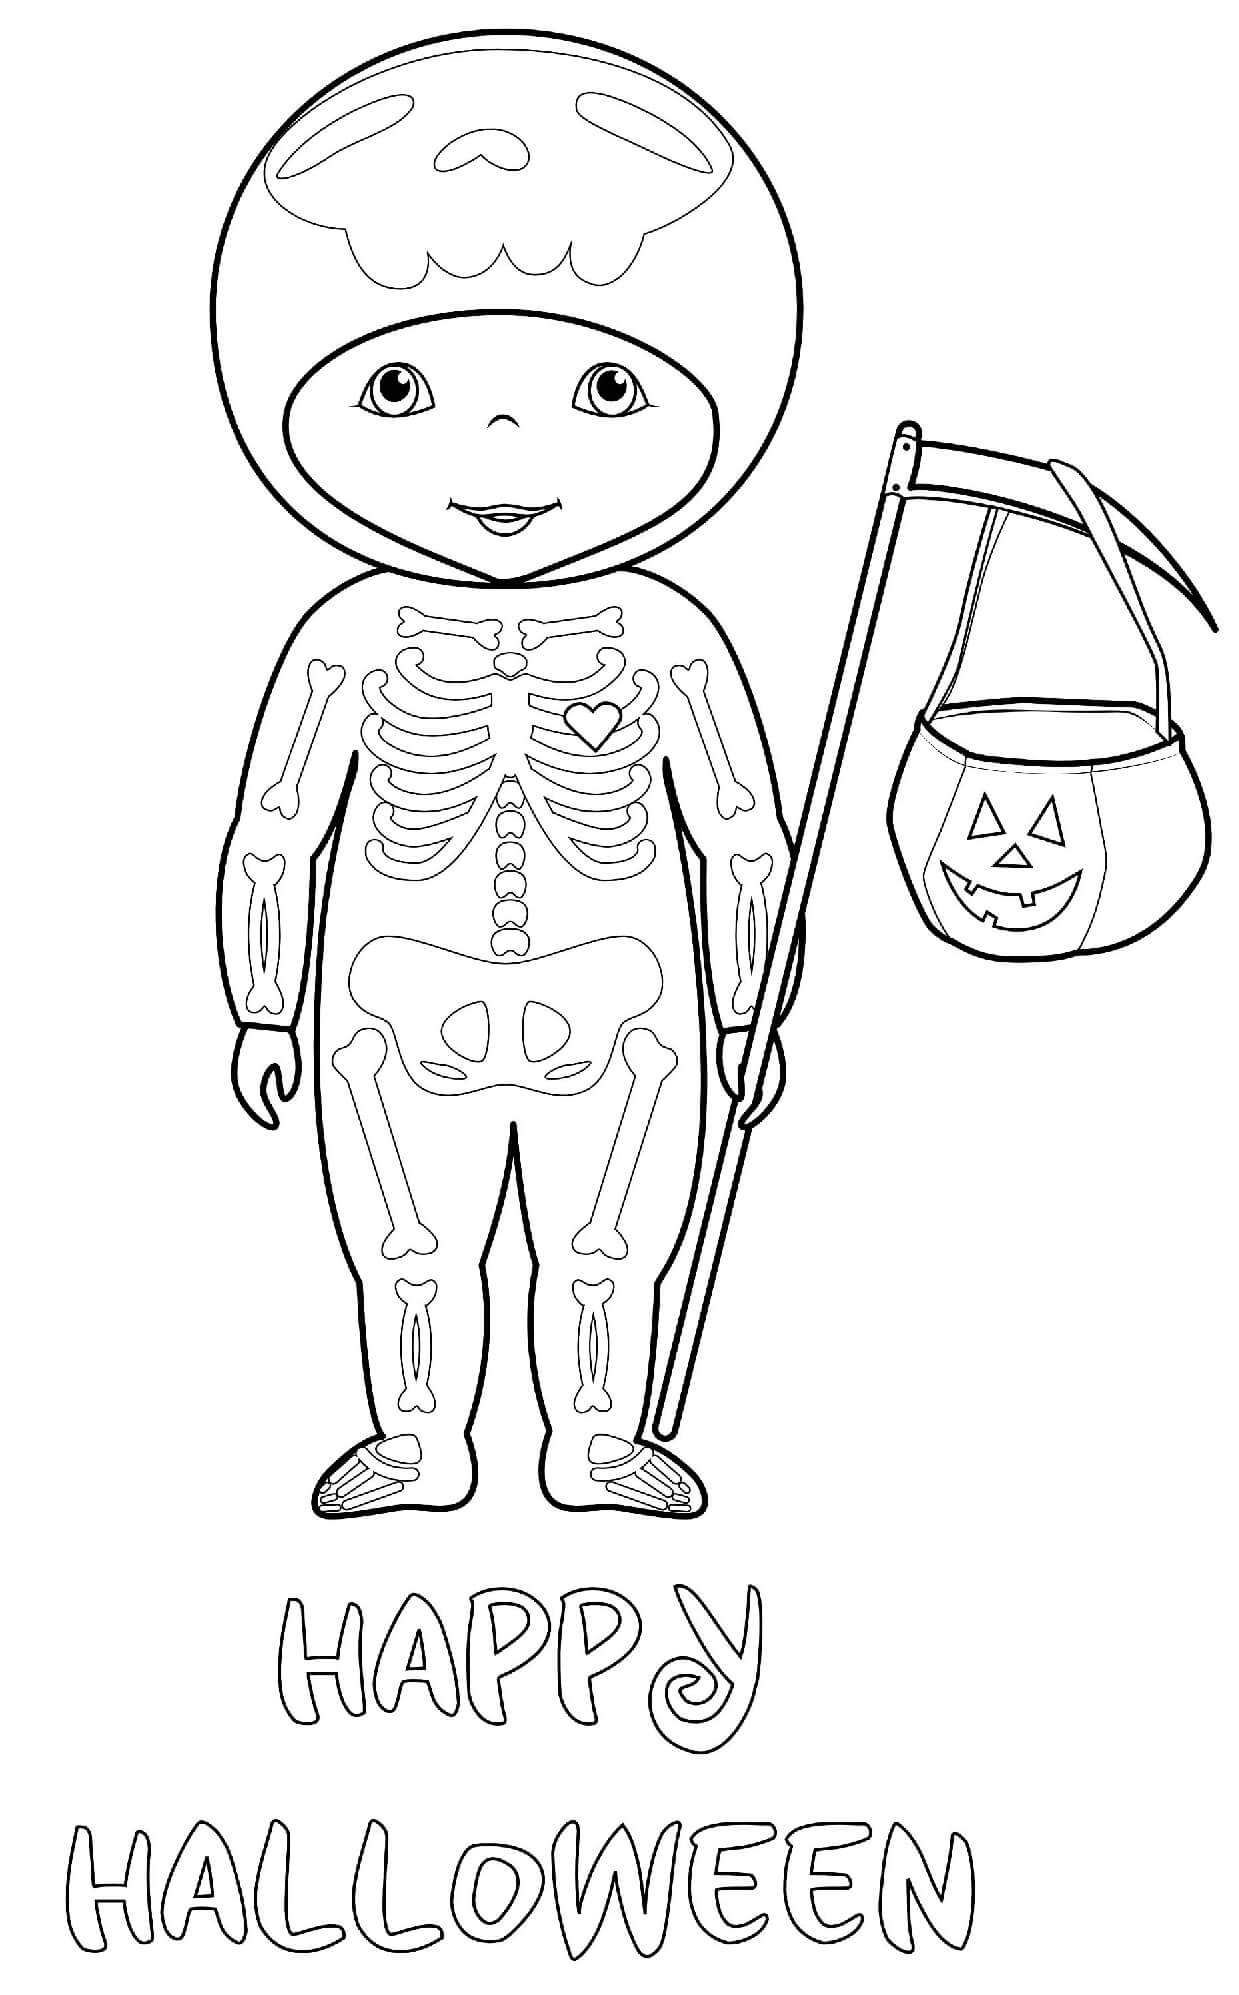 Halloween Skeleton Trick Treat Costume Coloring Page